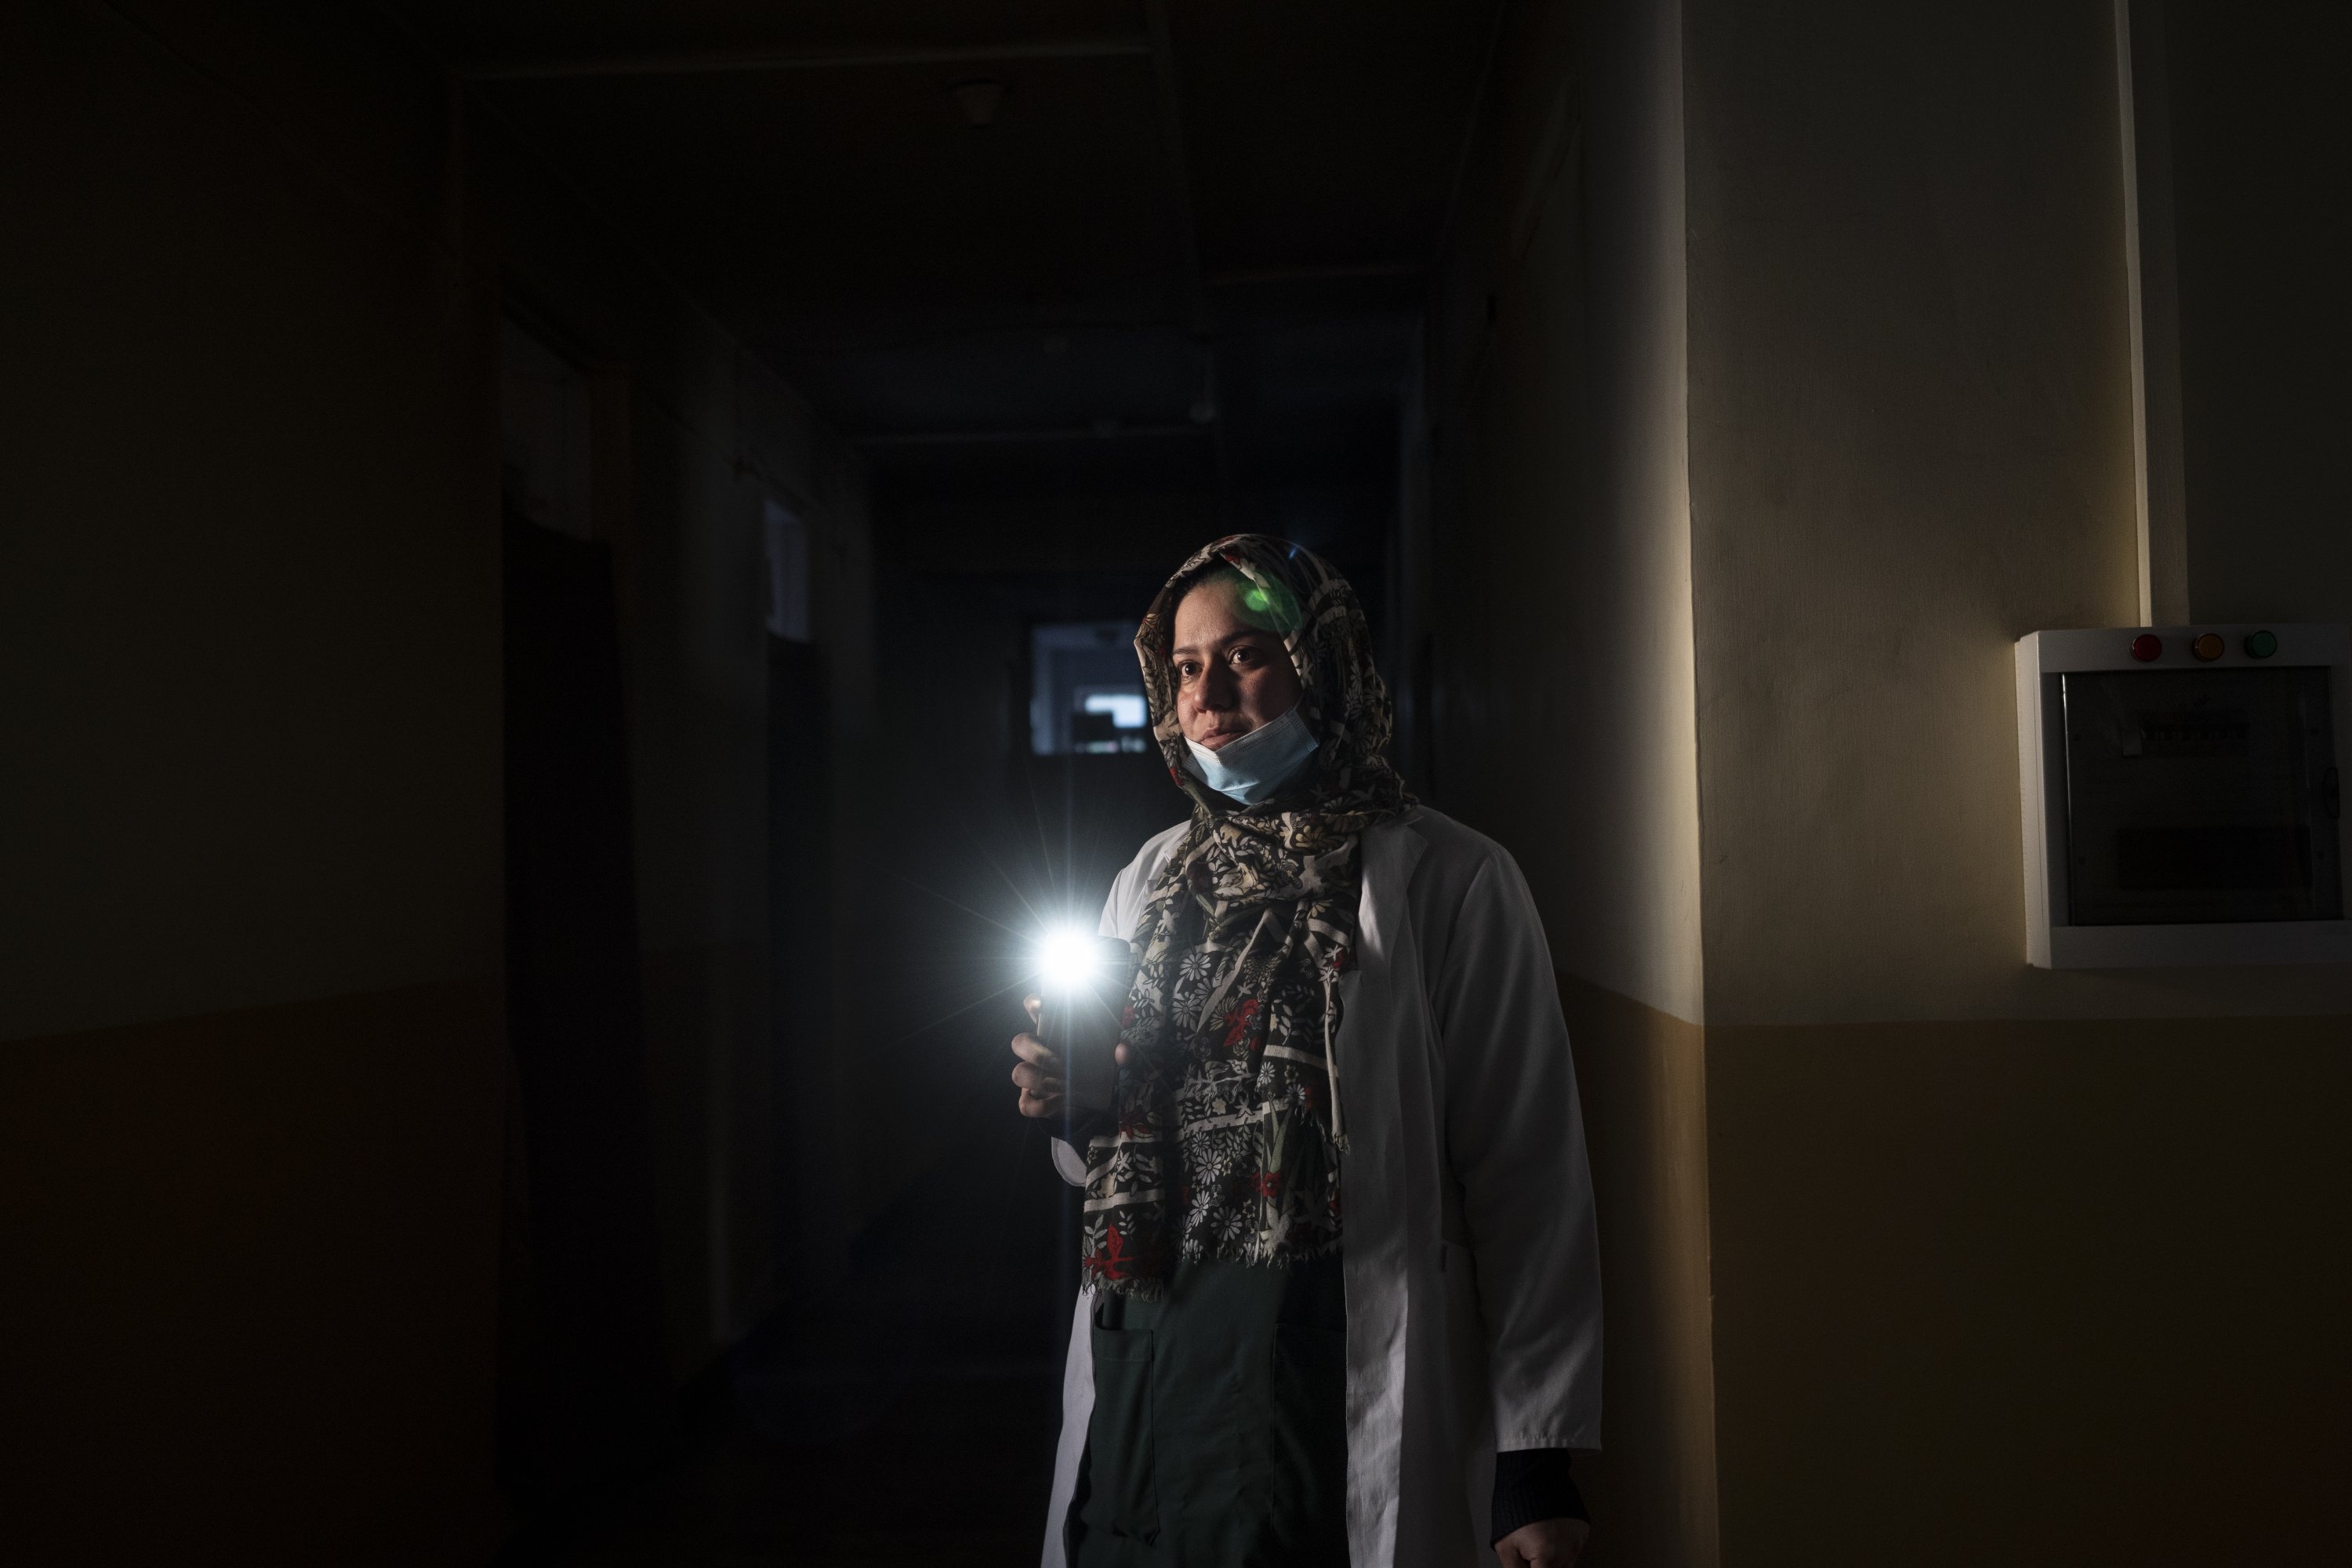 Dr. Elaha Ibrahimi uses her phone as a torch during a power cut inside the hospital in Mirbacha Kot, Afghanistan, Oct. 24, 2021. (AP Photo)